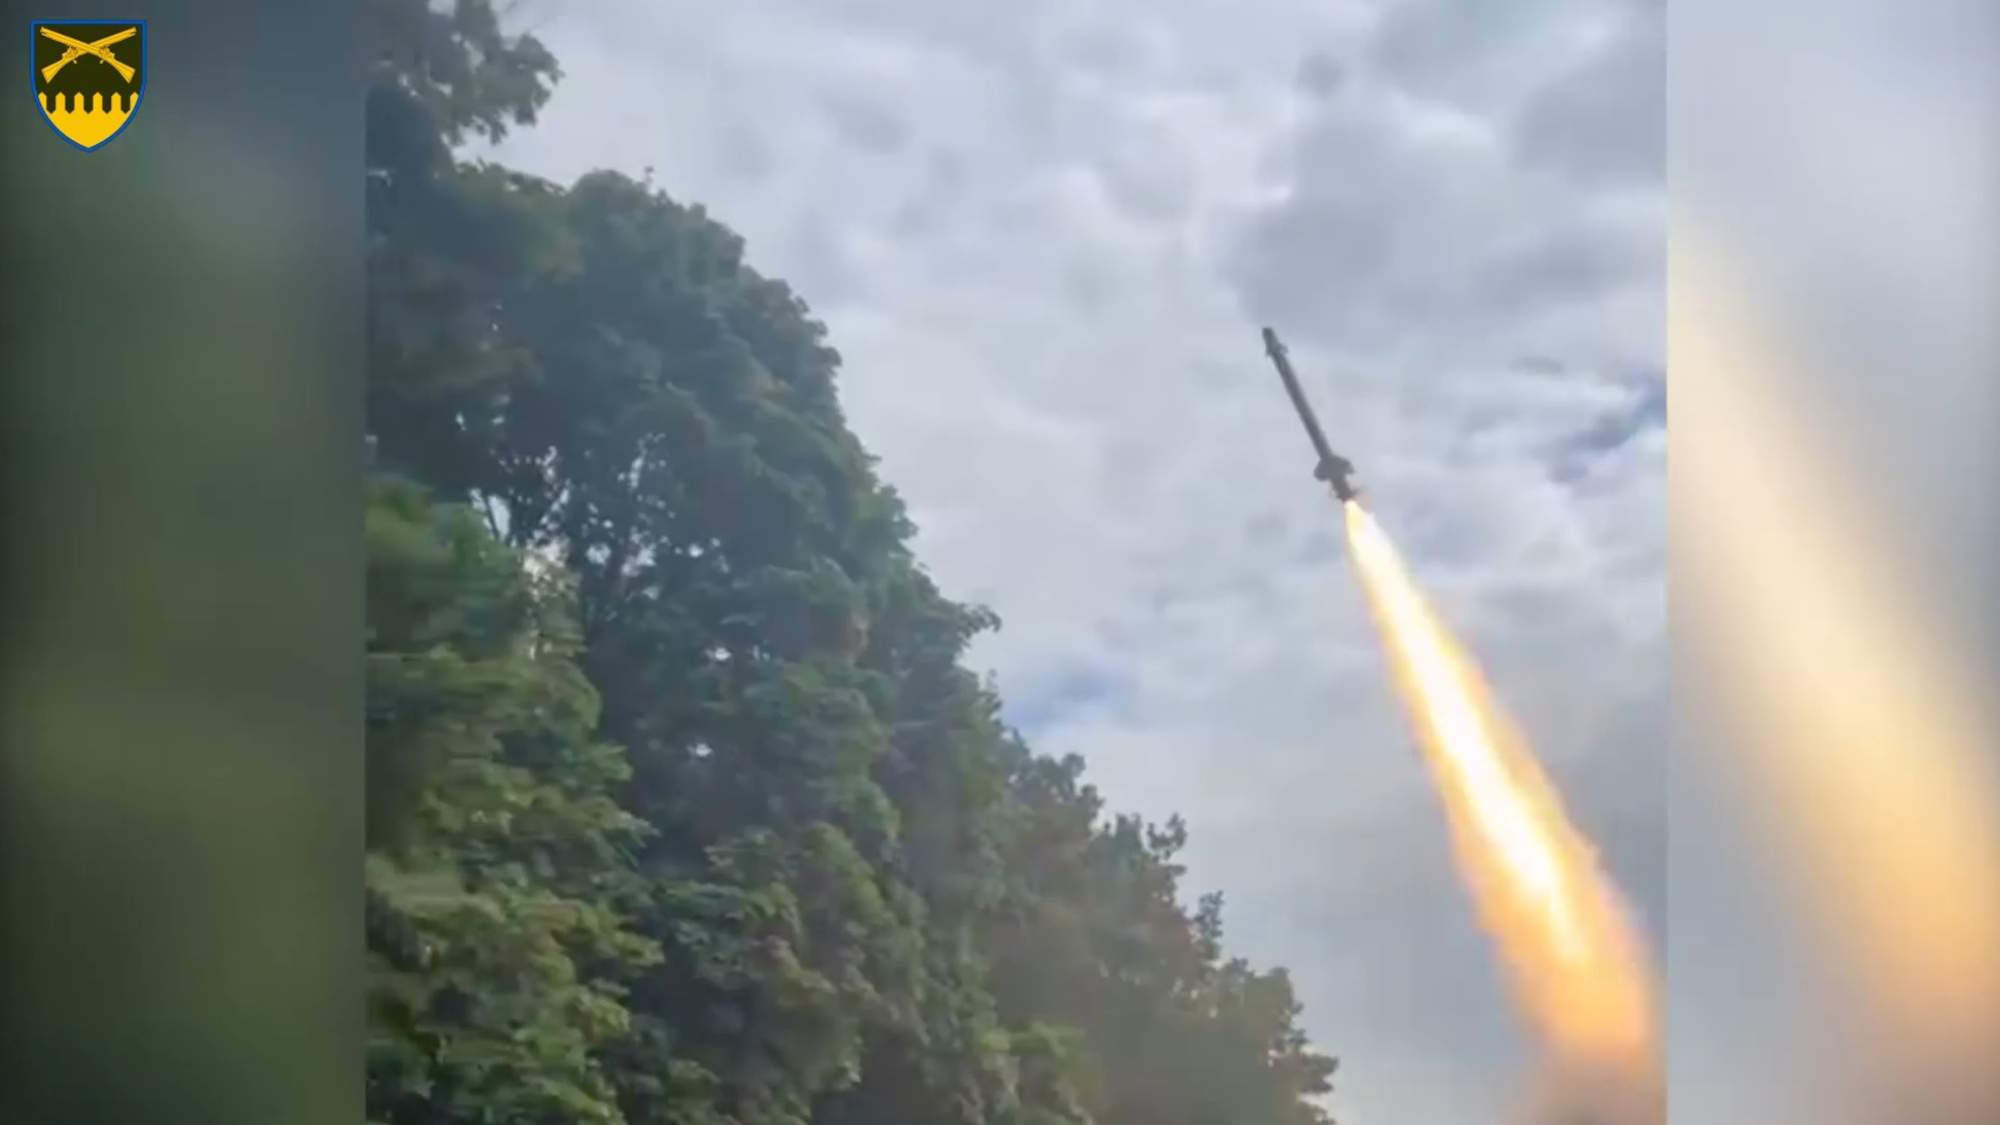  Incredible Moment Anti-Aircraft Missile Takes Out Tiny…